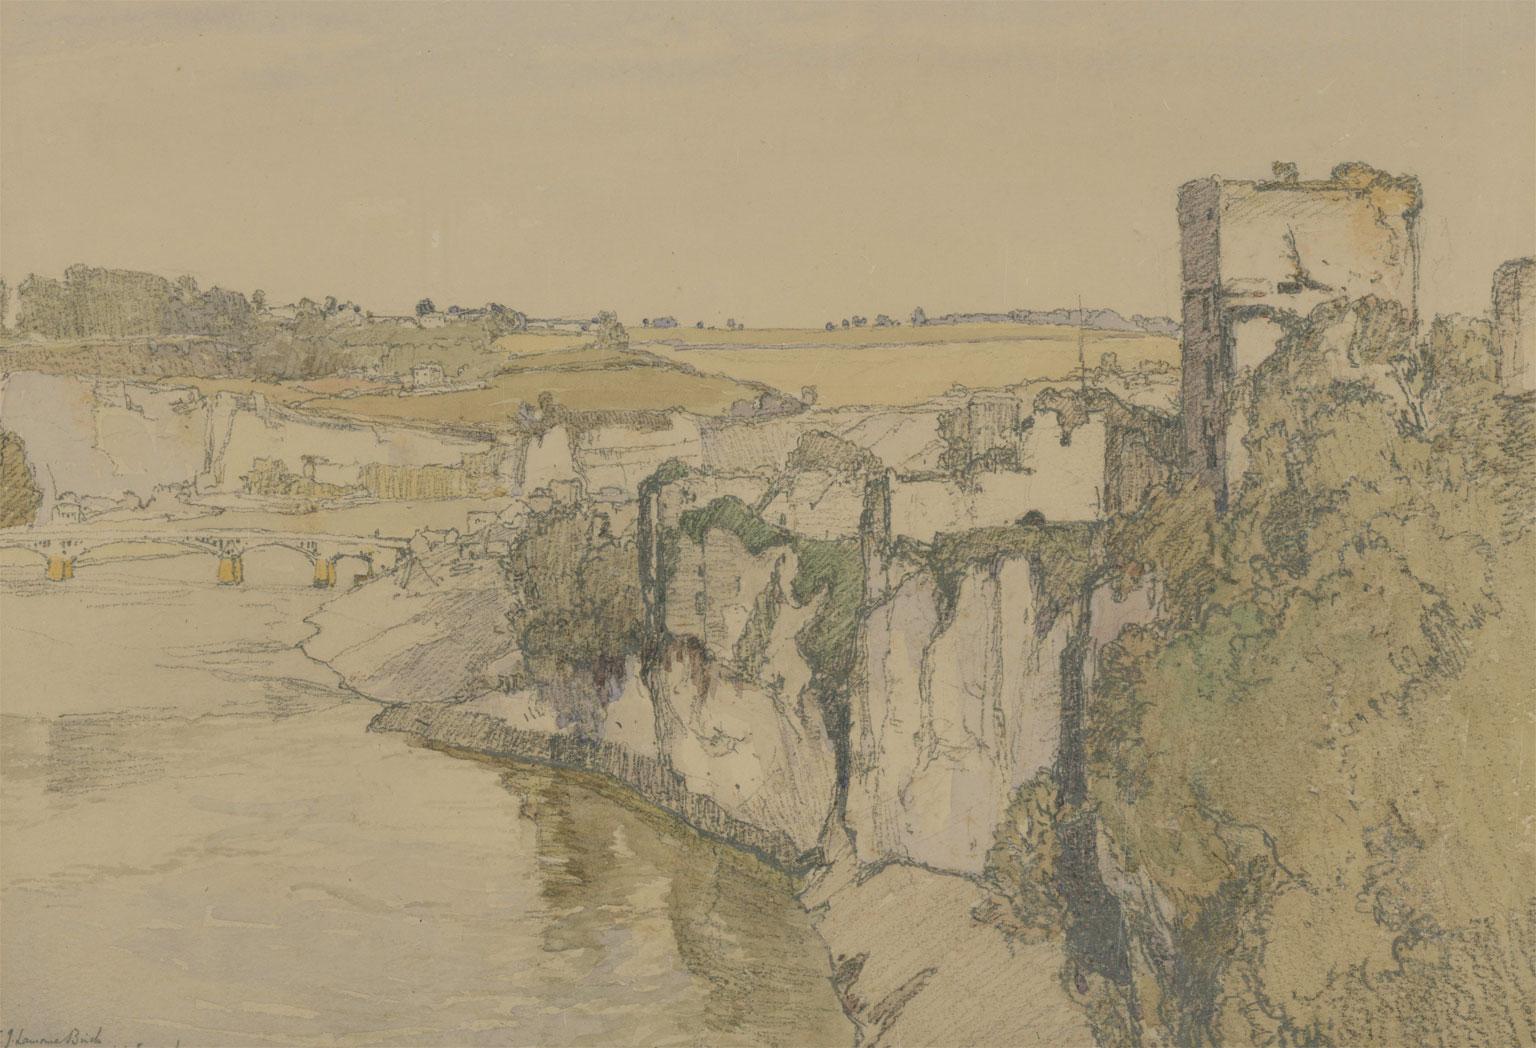 A fine and carefully detailed 1916 watercolour with graphite detail by the artist Samuel John Lamorna Birch (1869-1955), depicting Chepstow Castle on the river Wye in Wales. This meticulously detailed composition has an angled viewpoint, adding